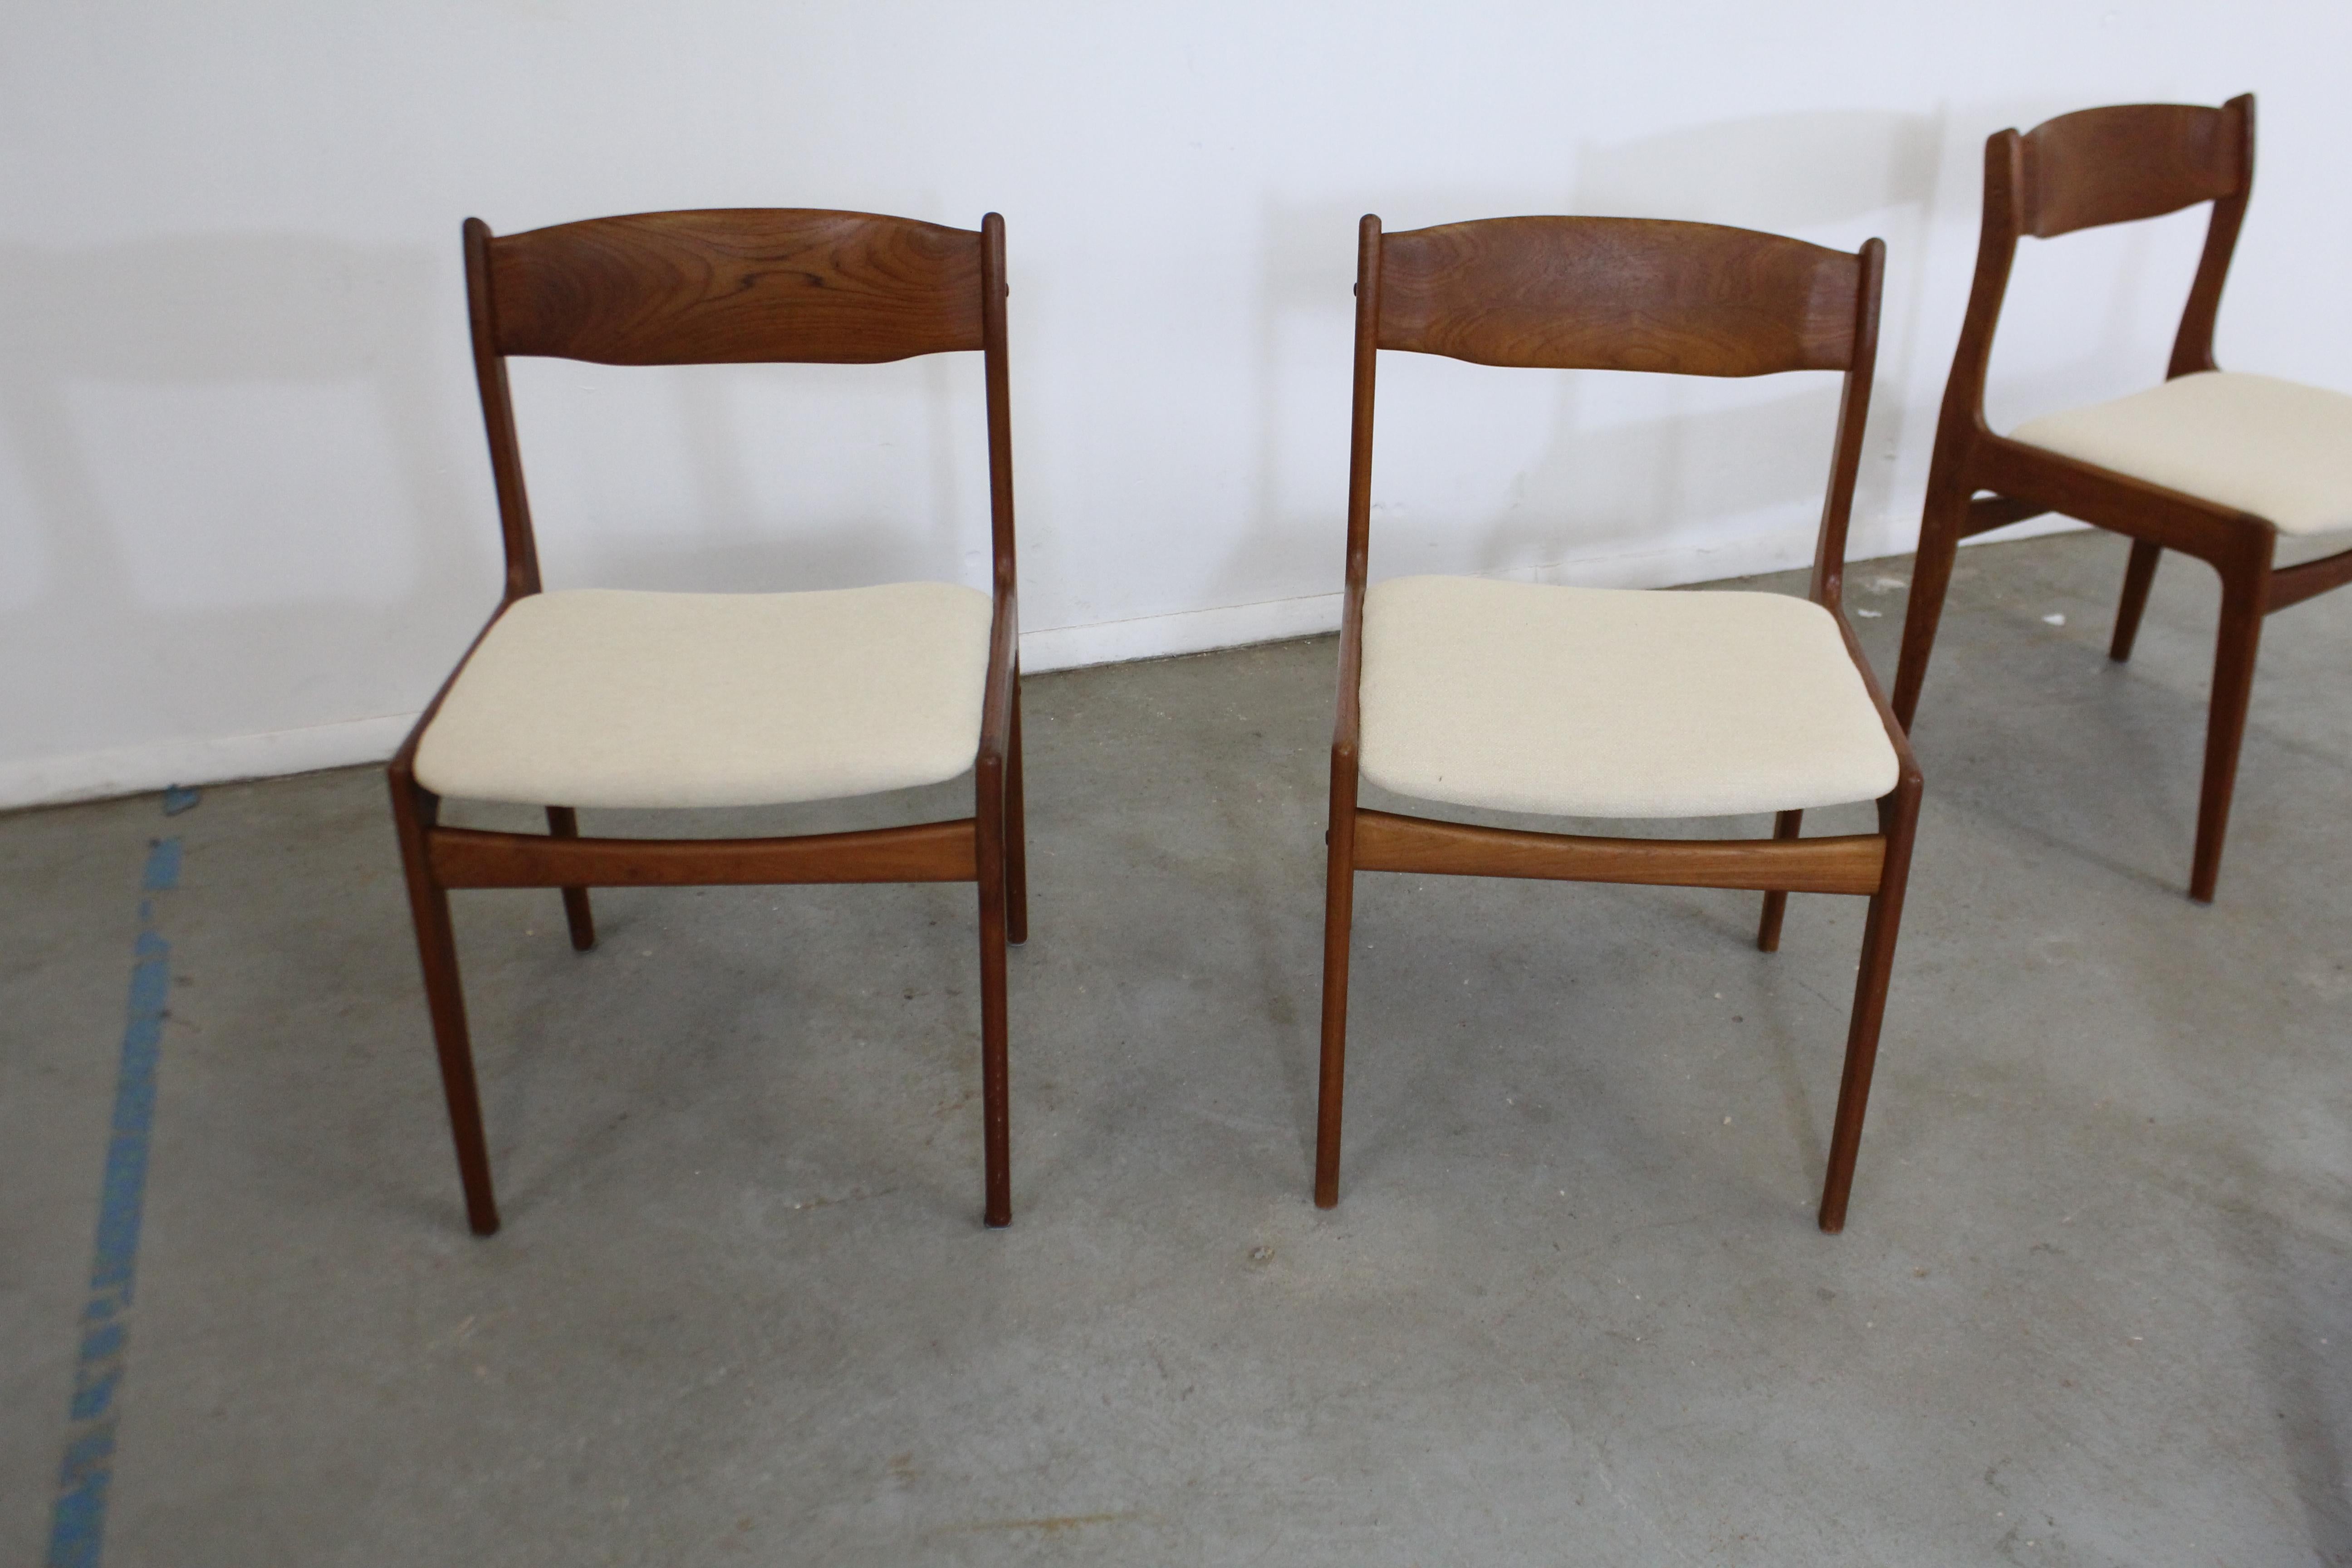 What a find. Offered is a vintage set of 4 midcentury Danish modern teak side dining chairs with teak backs. This set has simple, but modern lines and could make an excellent addition to any home. They are in good vintage condition and have been